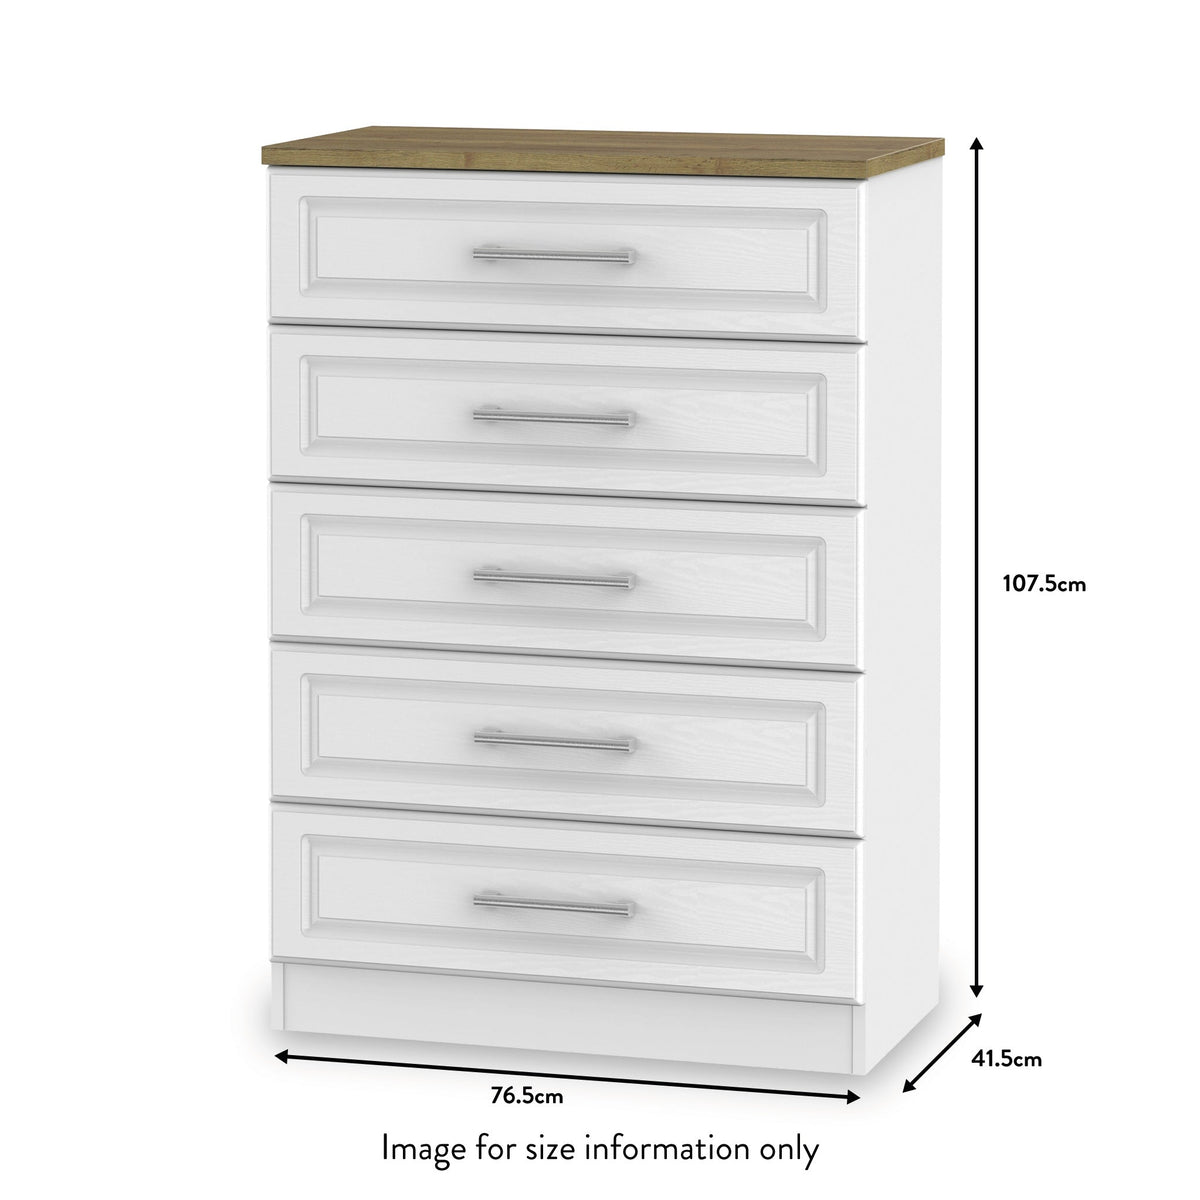 Talland White 5 Drawer Chest from Roseland size